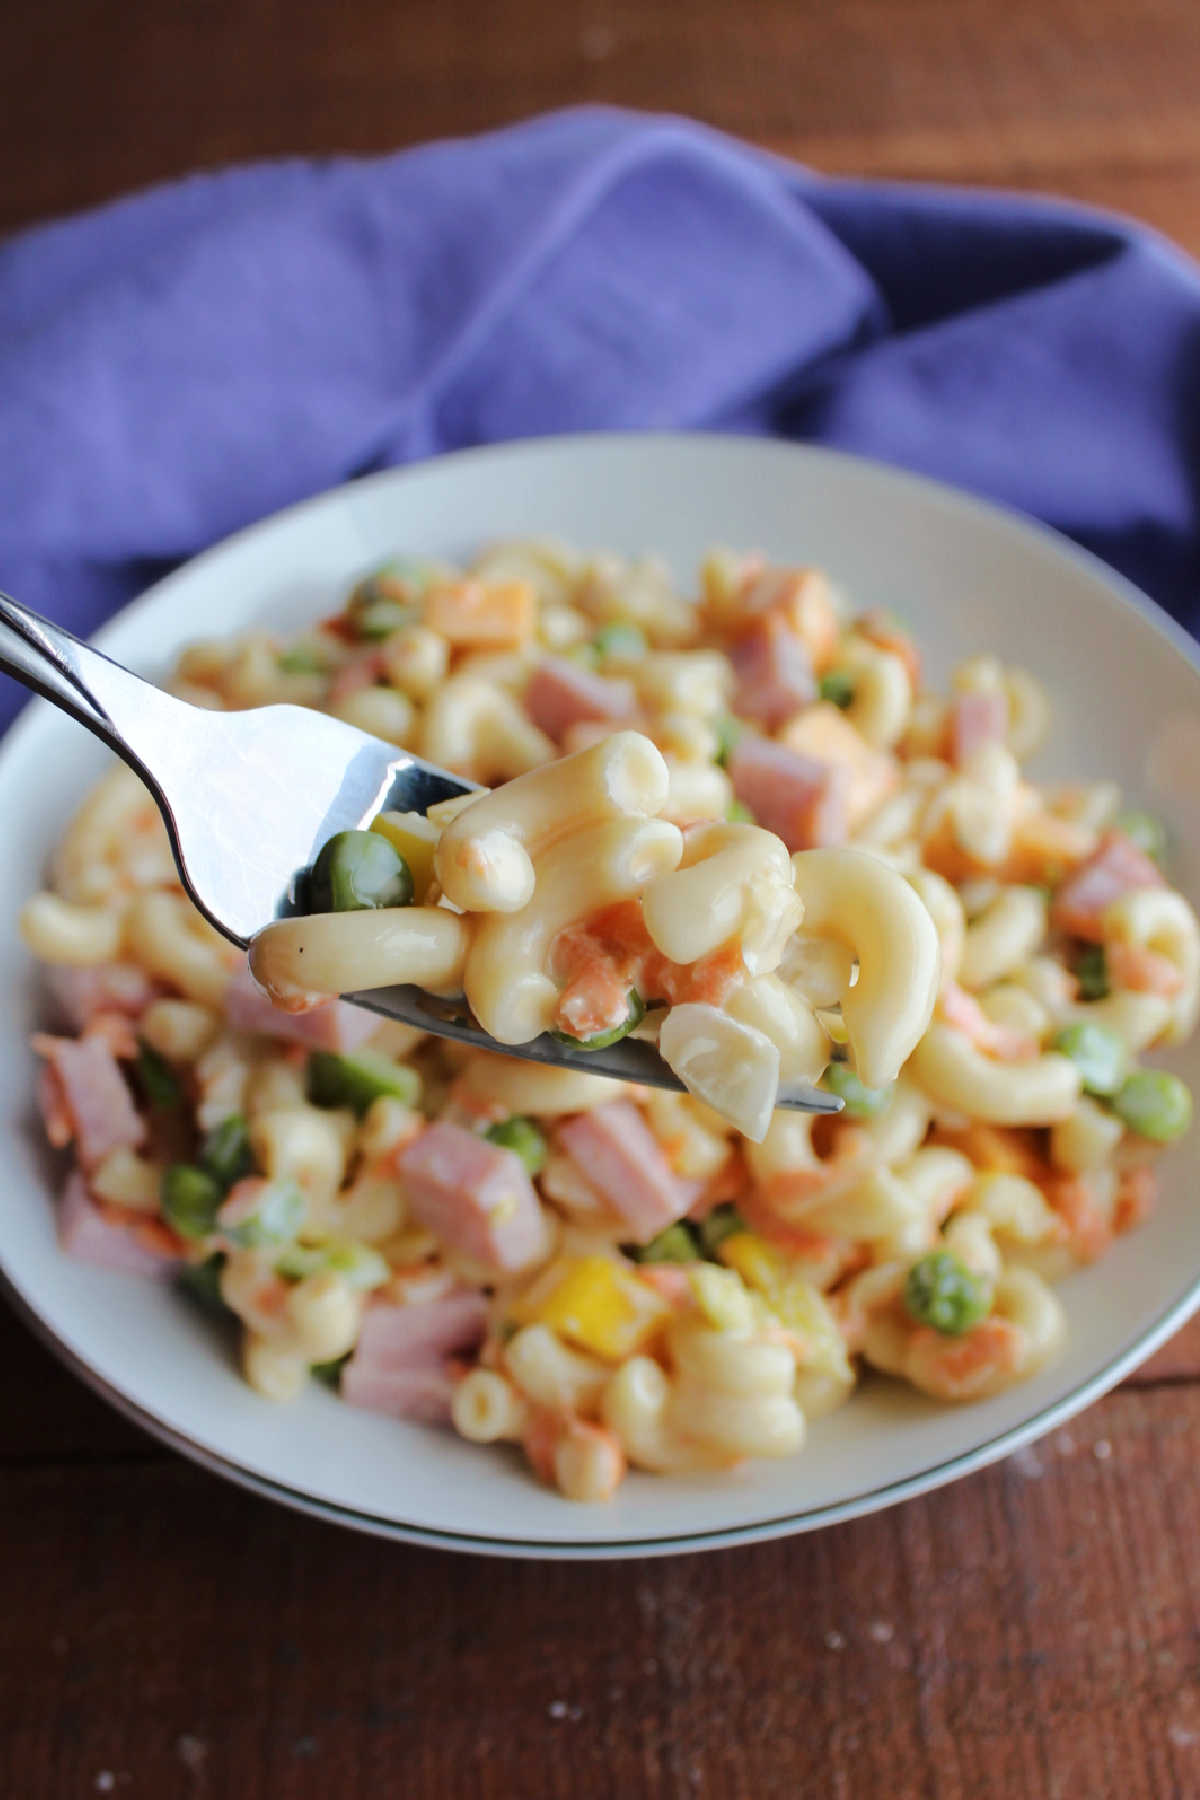 Bite of sweet macaroni salad on fork showing peas, onion, and shredded carrots. 